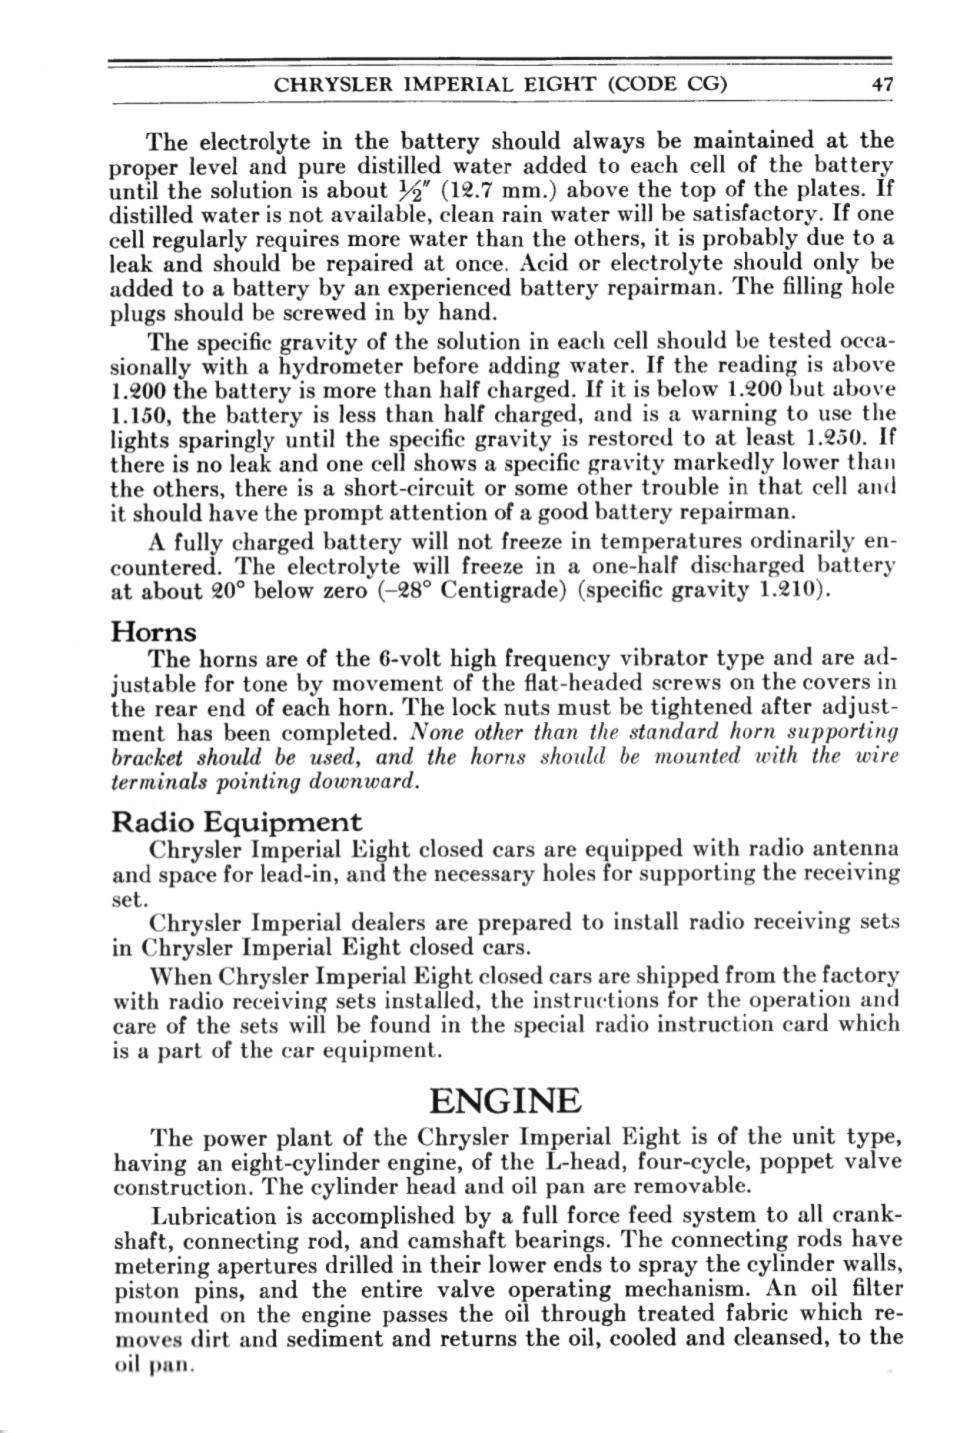 1931 Chrysler Imperial Owners Manual Page 87